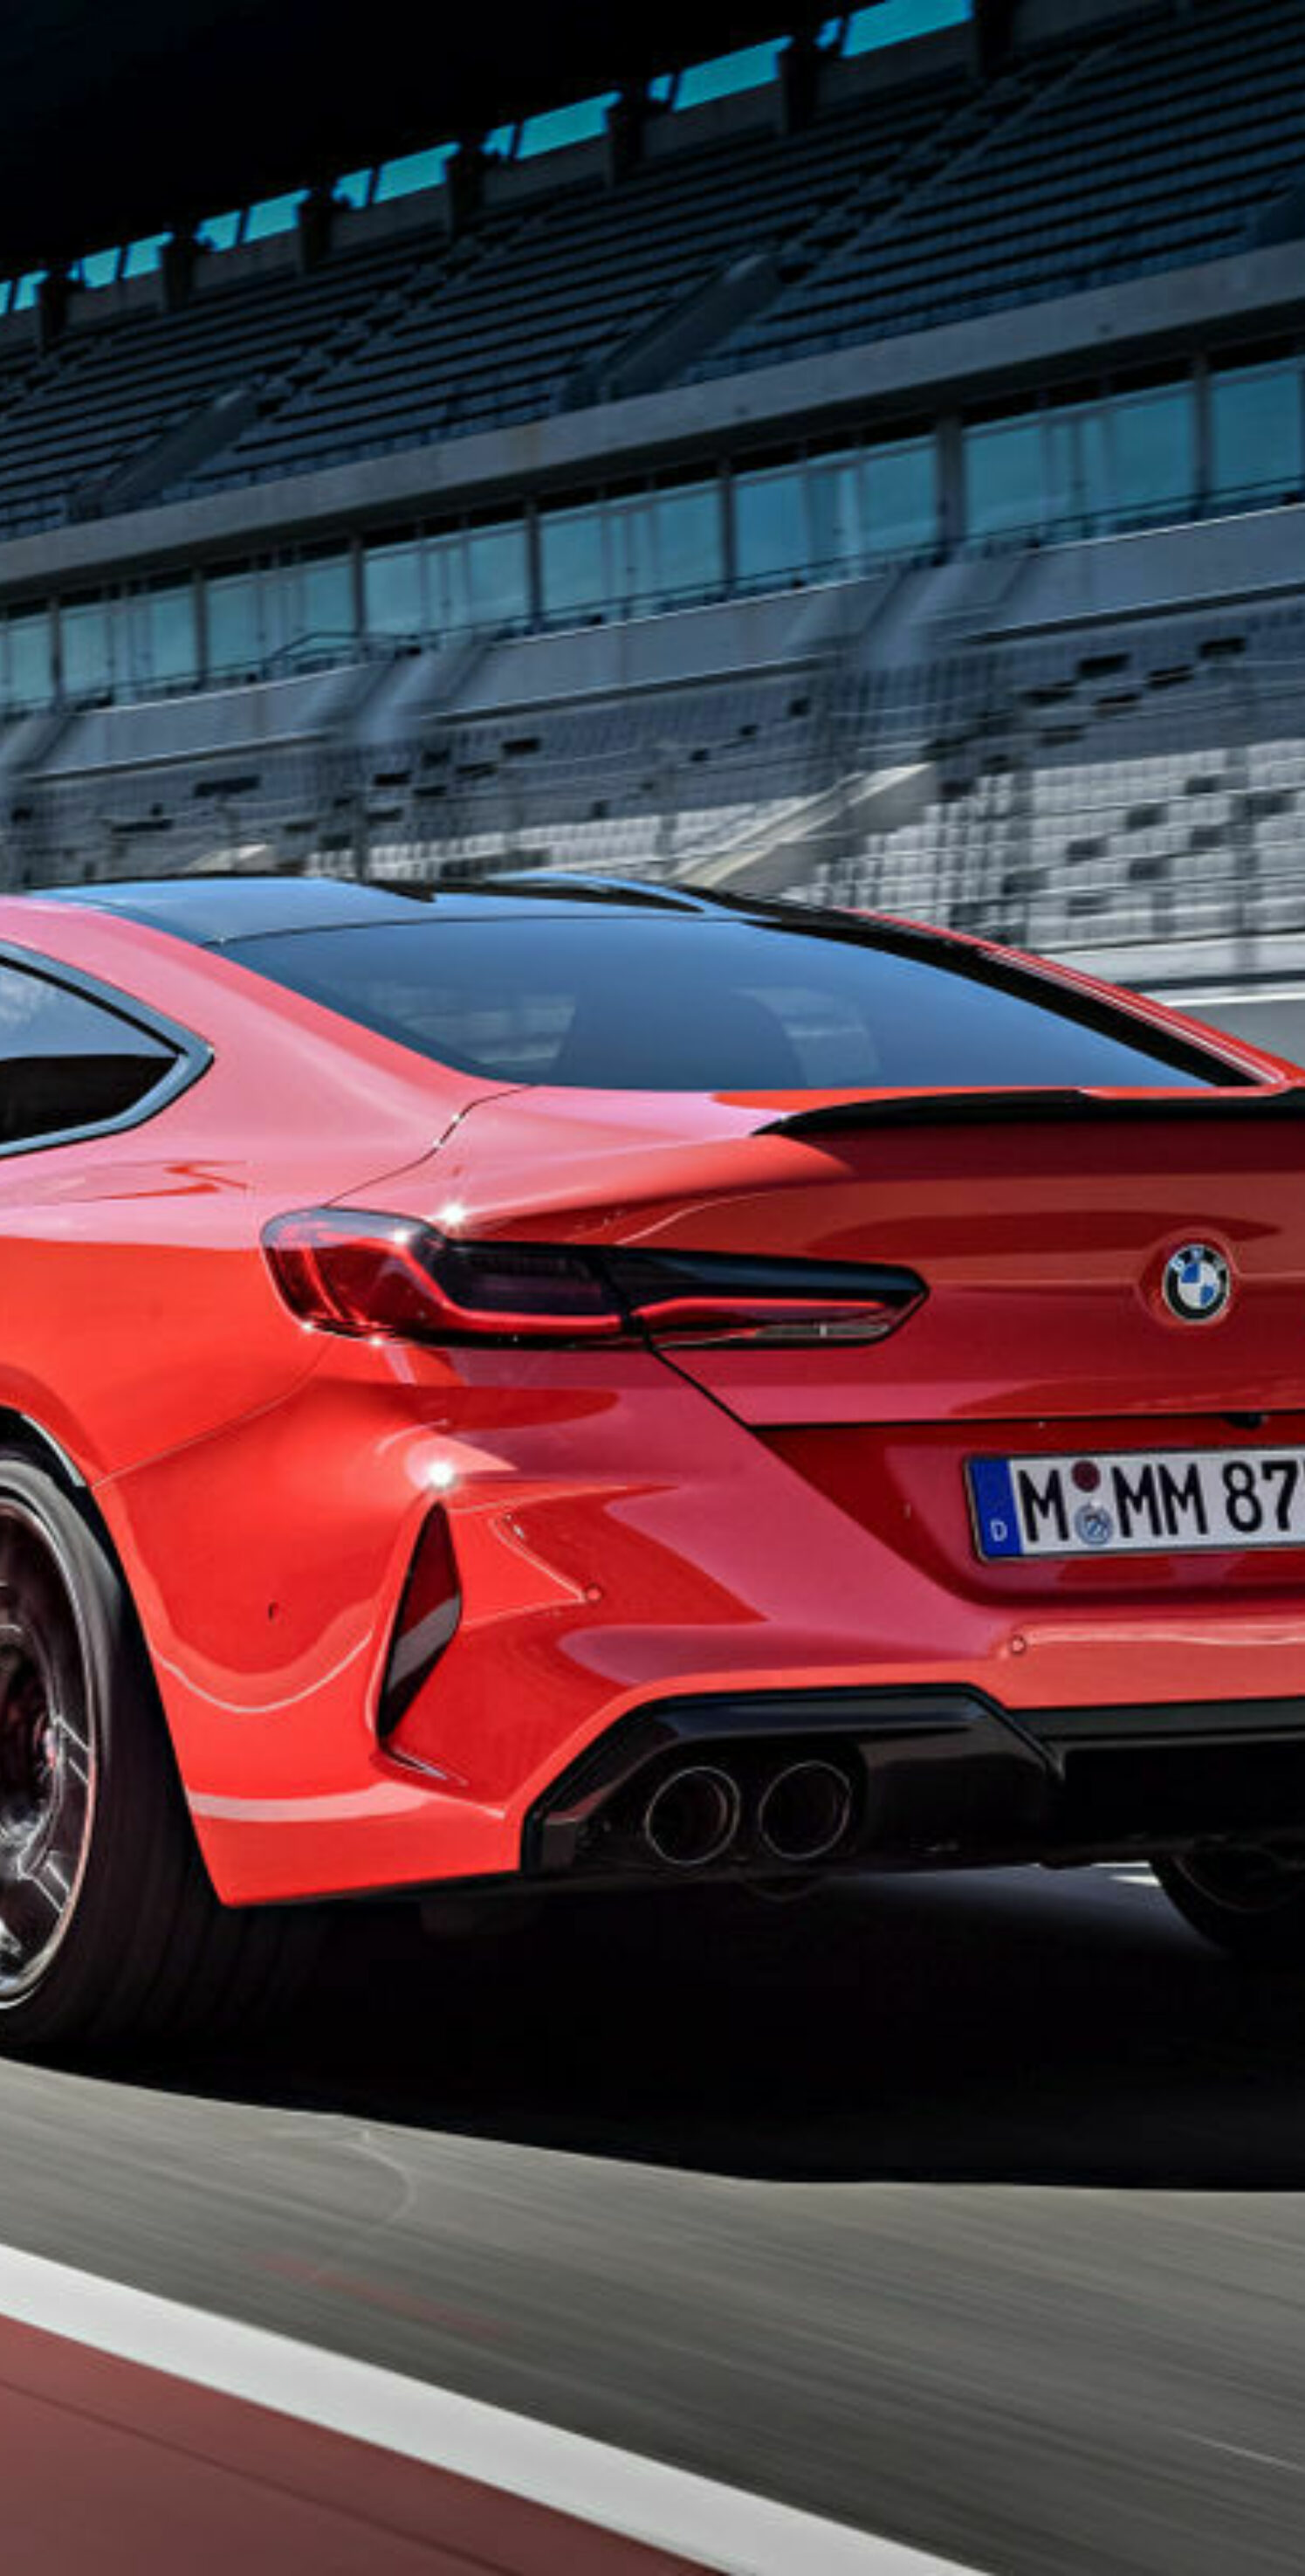 https://autofilter.sk/assets/images/rad-8-coupe/gallery/bmw-m8-coupe_07-galeria.jpg - obrazok